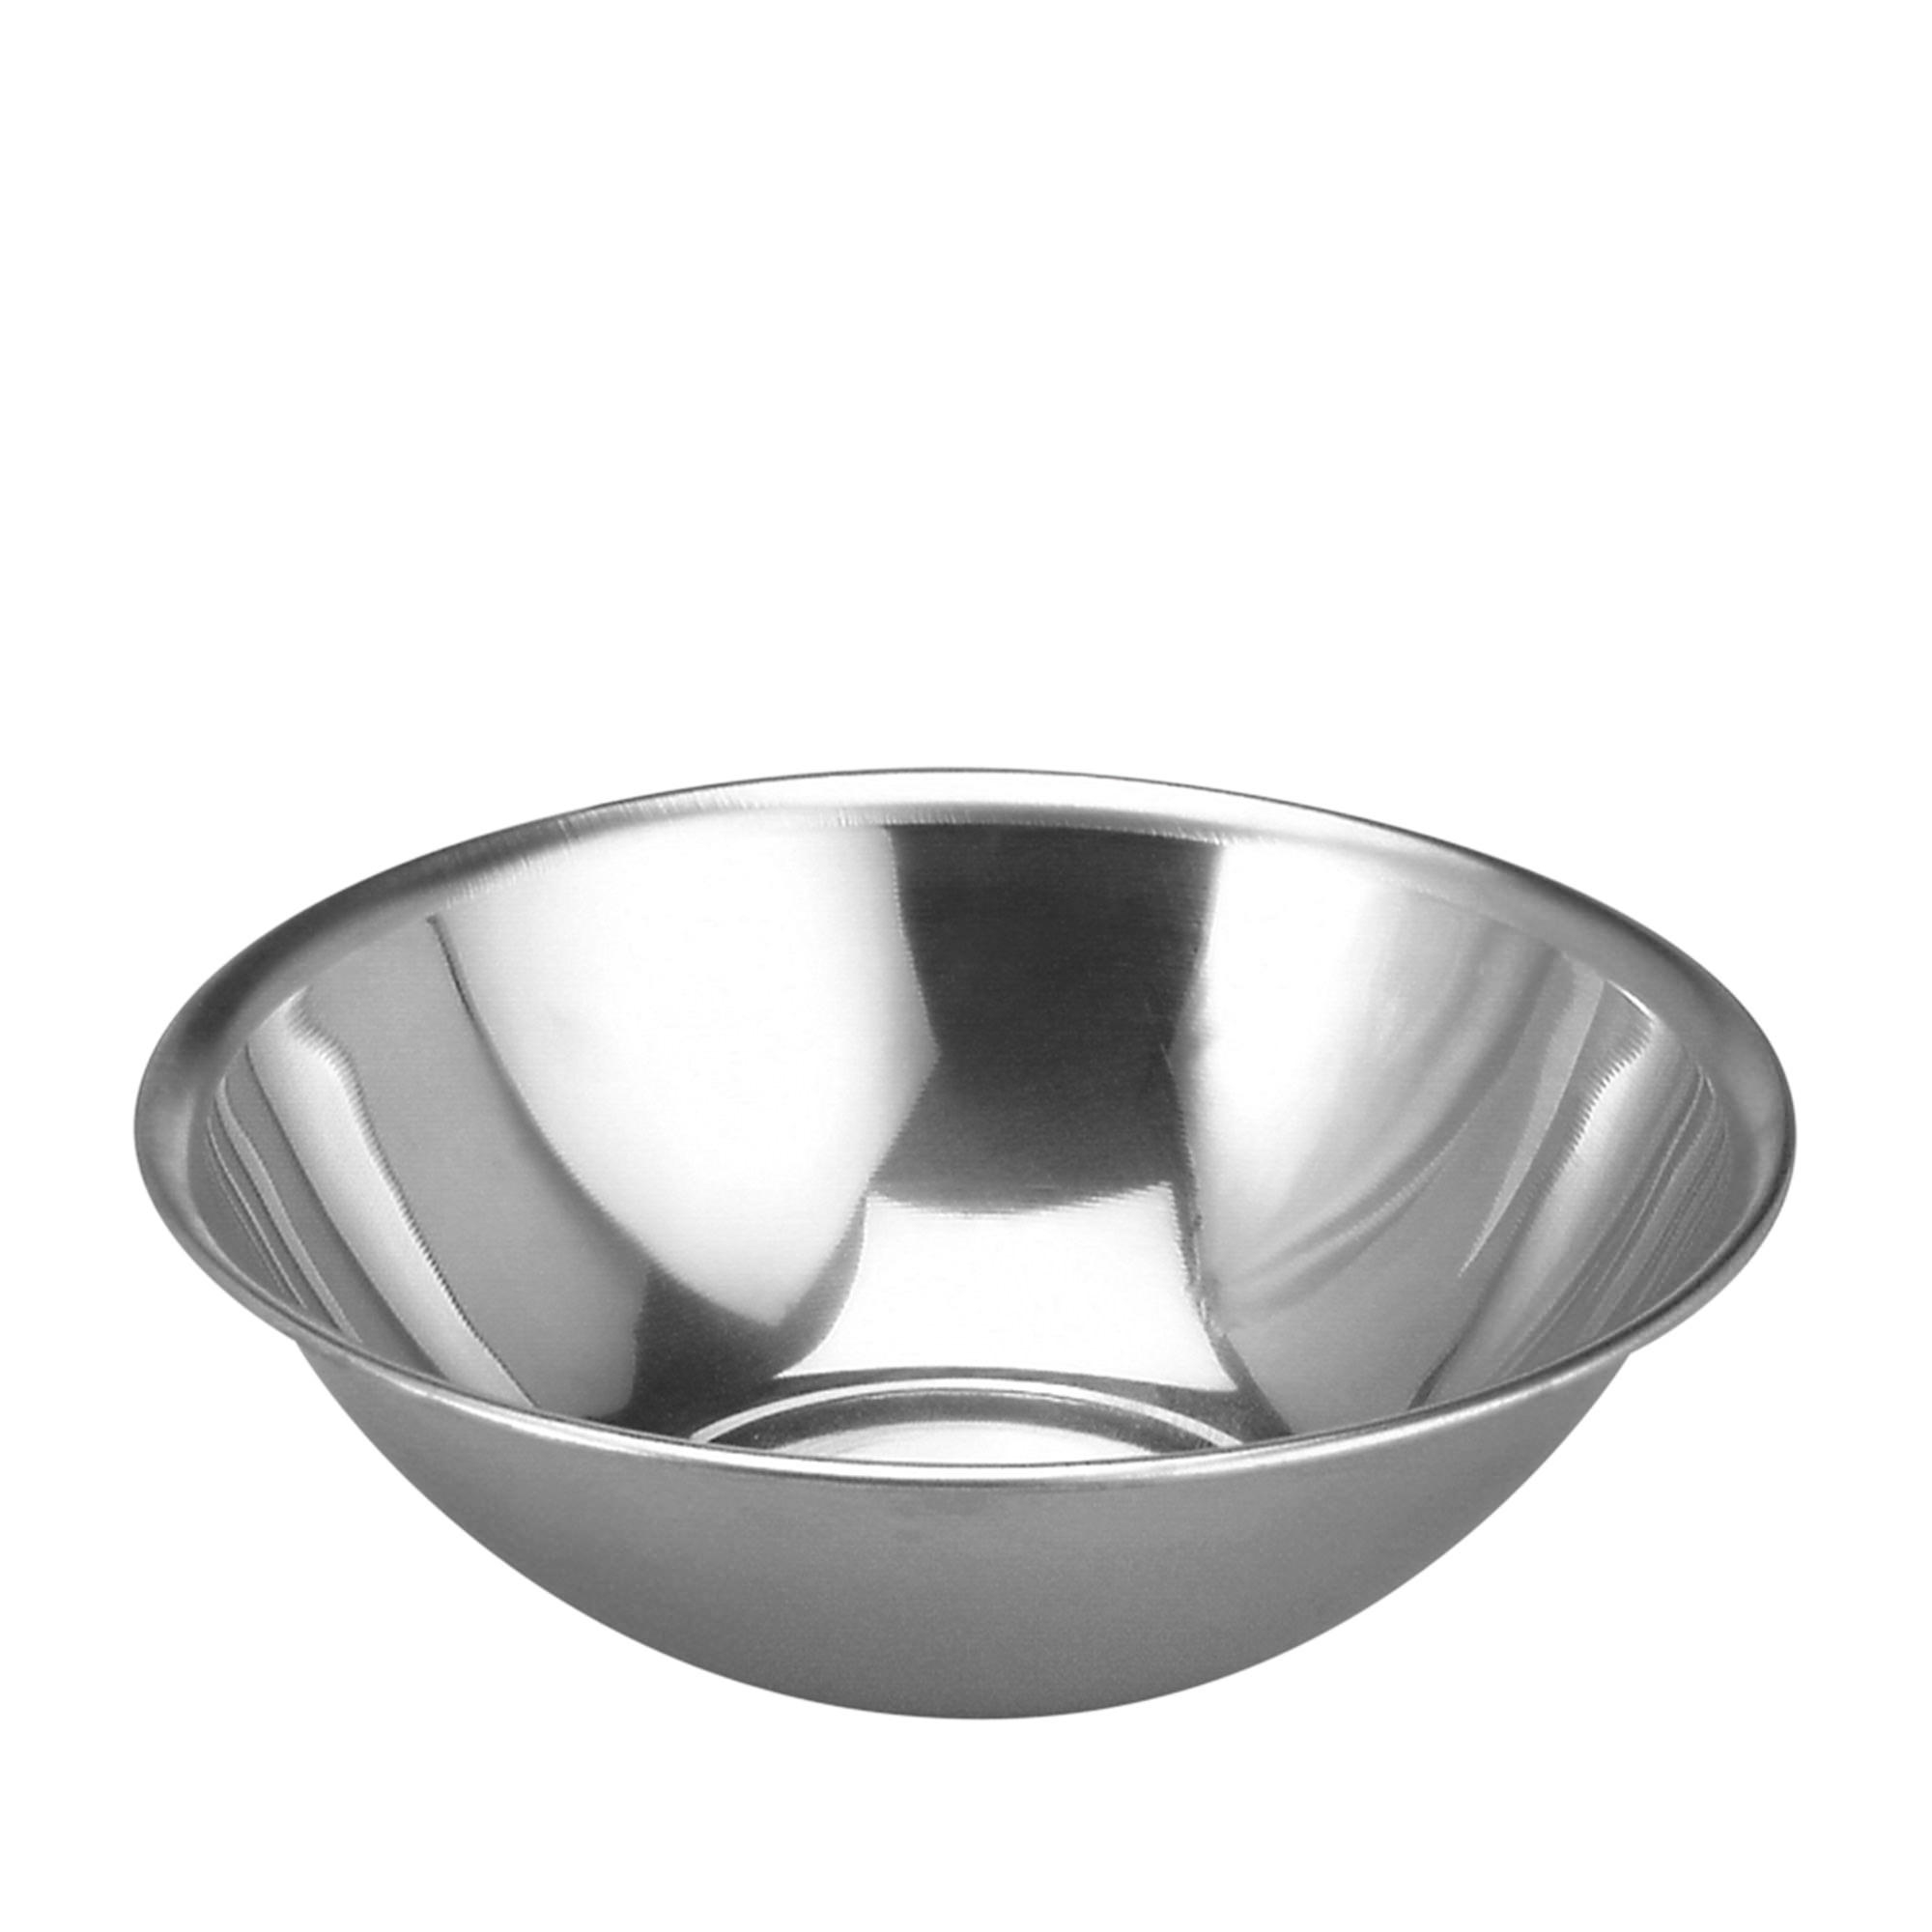 Chef Inox Stainless Steel Mixing Bowl 48.5cm - 17L Image 1